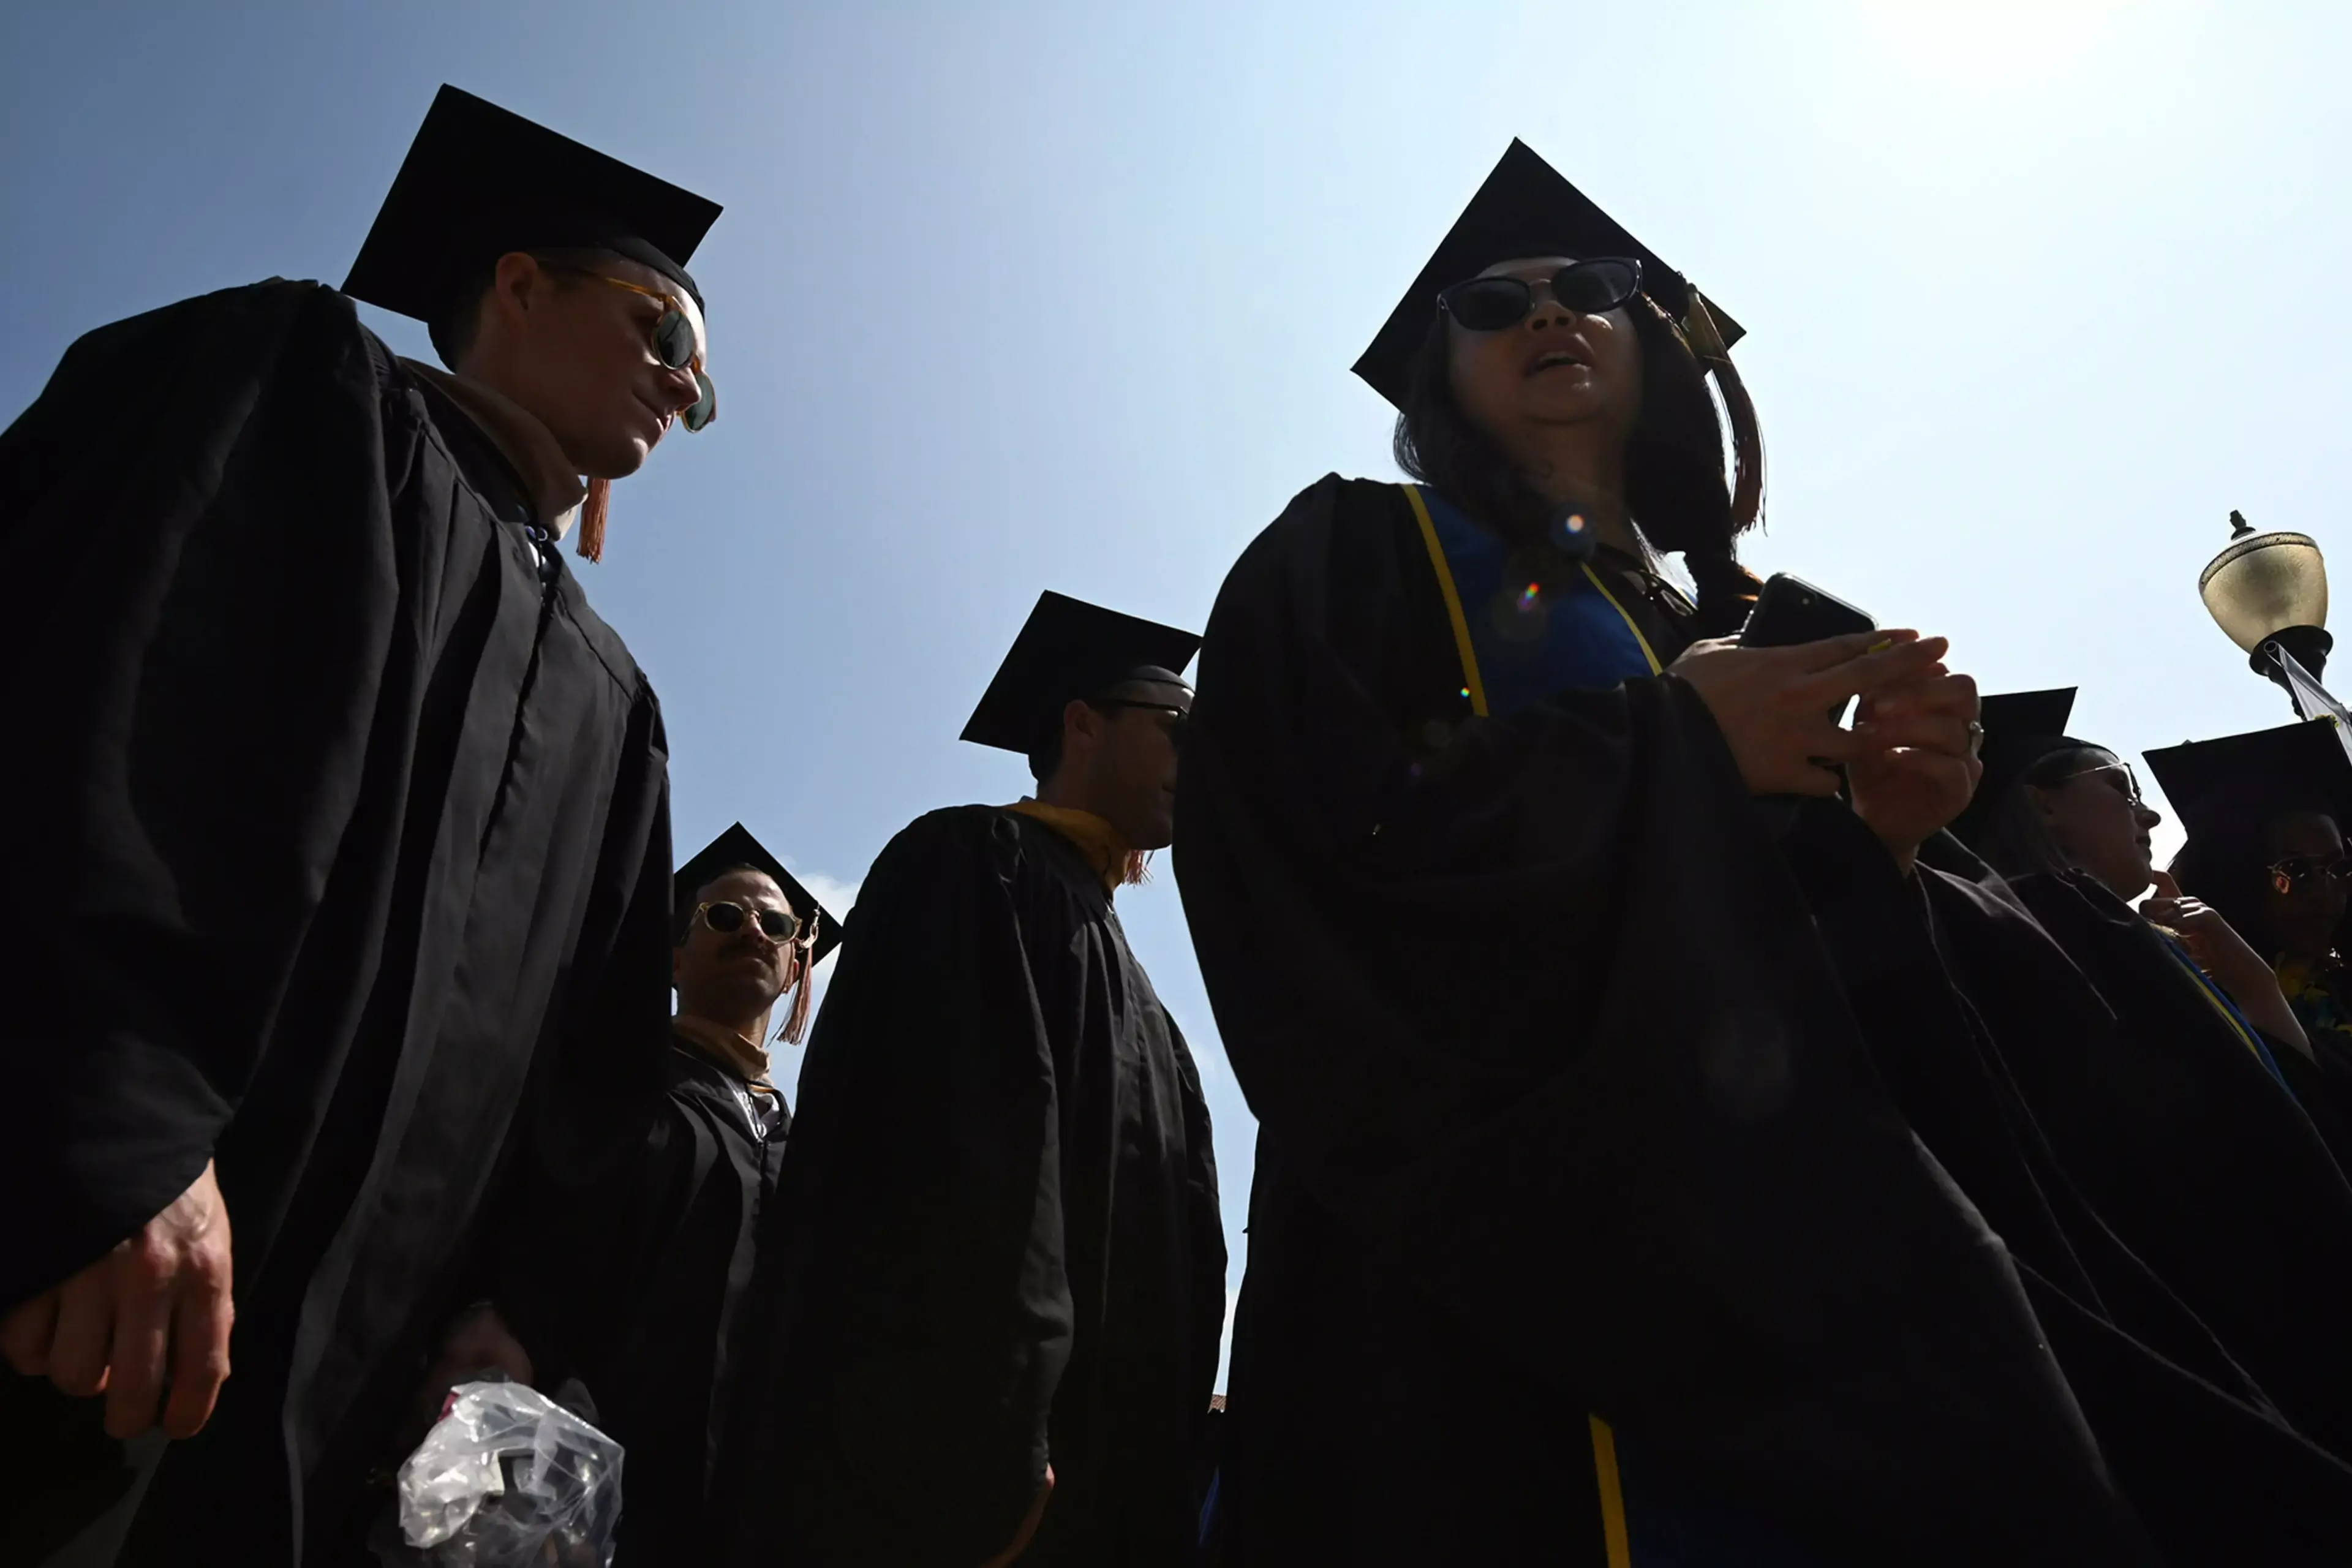 Students attend their graduation ceremony at the University of California, Los Angeles.